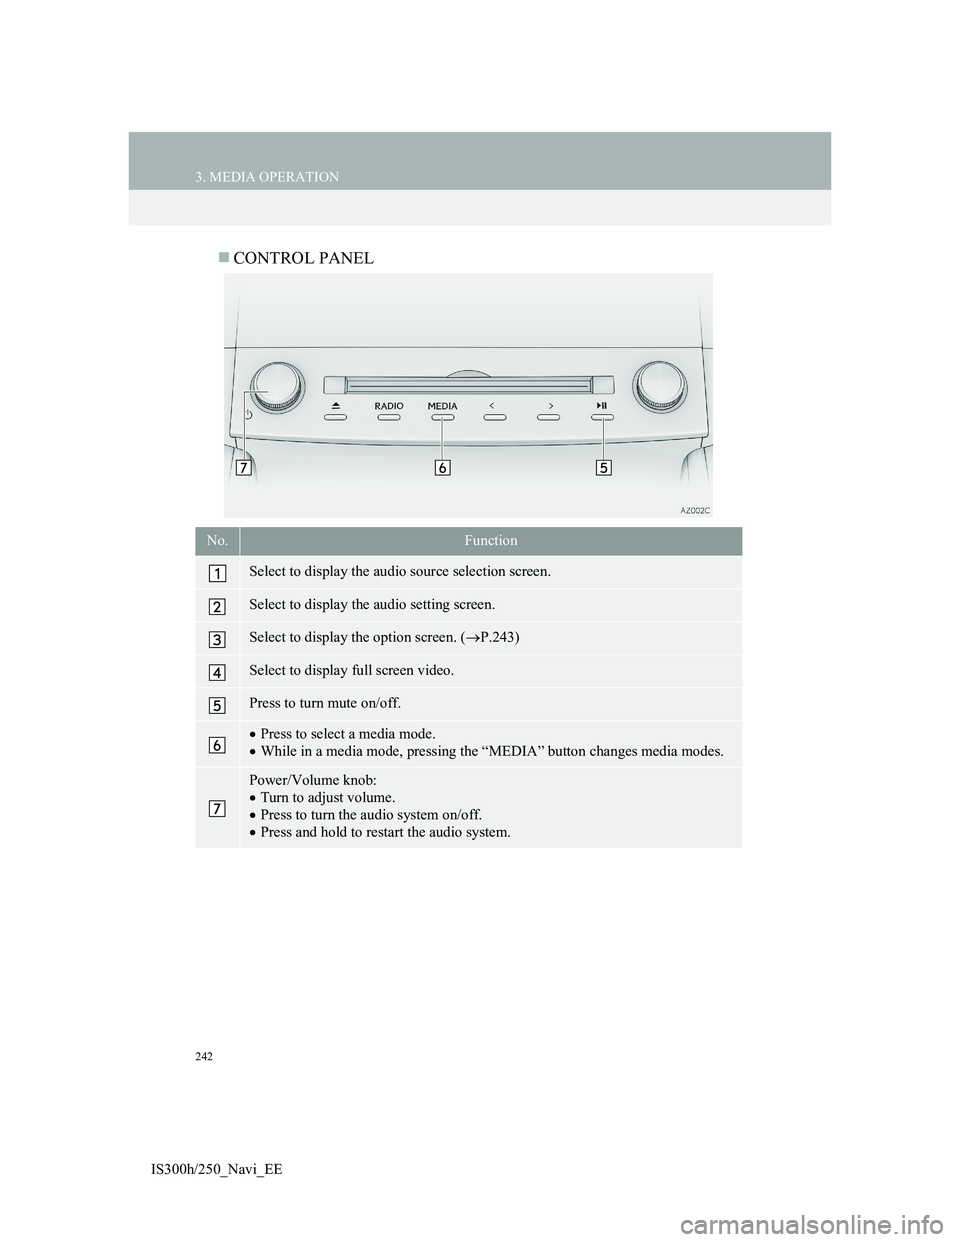 Lexus IS300h 2013  Navigation manual 242
3. MEDIA OPERATION
IS300h/250_Navi_EE
CONTROL PANEL
No.Function
Select to display the audio source selection screen.
Select to display the audio setting screen.
Select to display the option scr